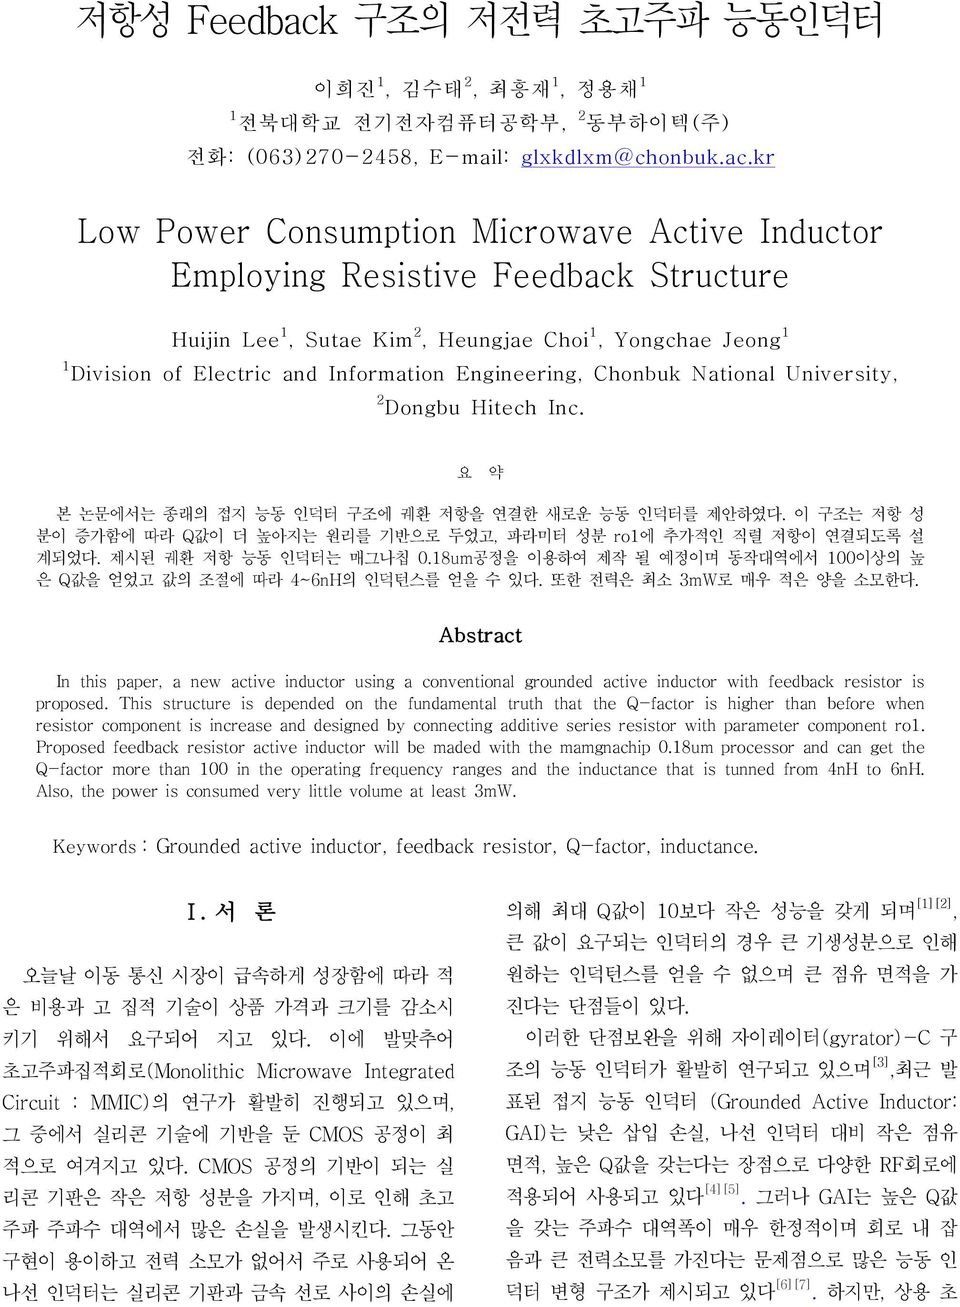 k, Low Powe Consumption Micowave Active Inducto Employing Resistive Feedback Stuctue Huijin Lee, Sutae Kim 2, Heungjae Choi, Yongchae Jeong Division of Electic and Infomation Engineeing, Chonbuk